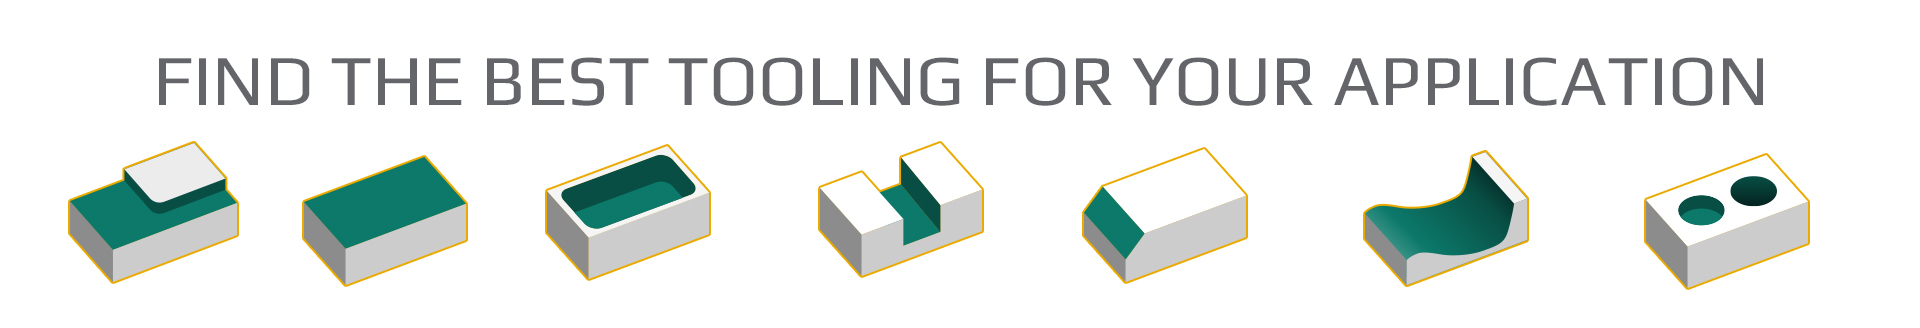 What's the best tooling for your milling application? Try our ToolFinder